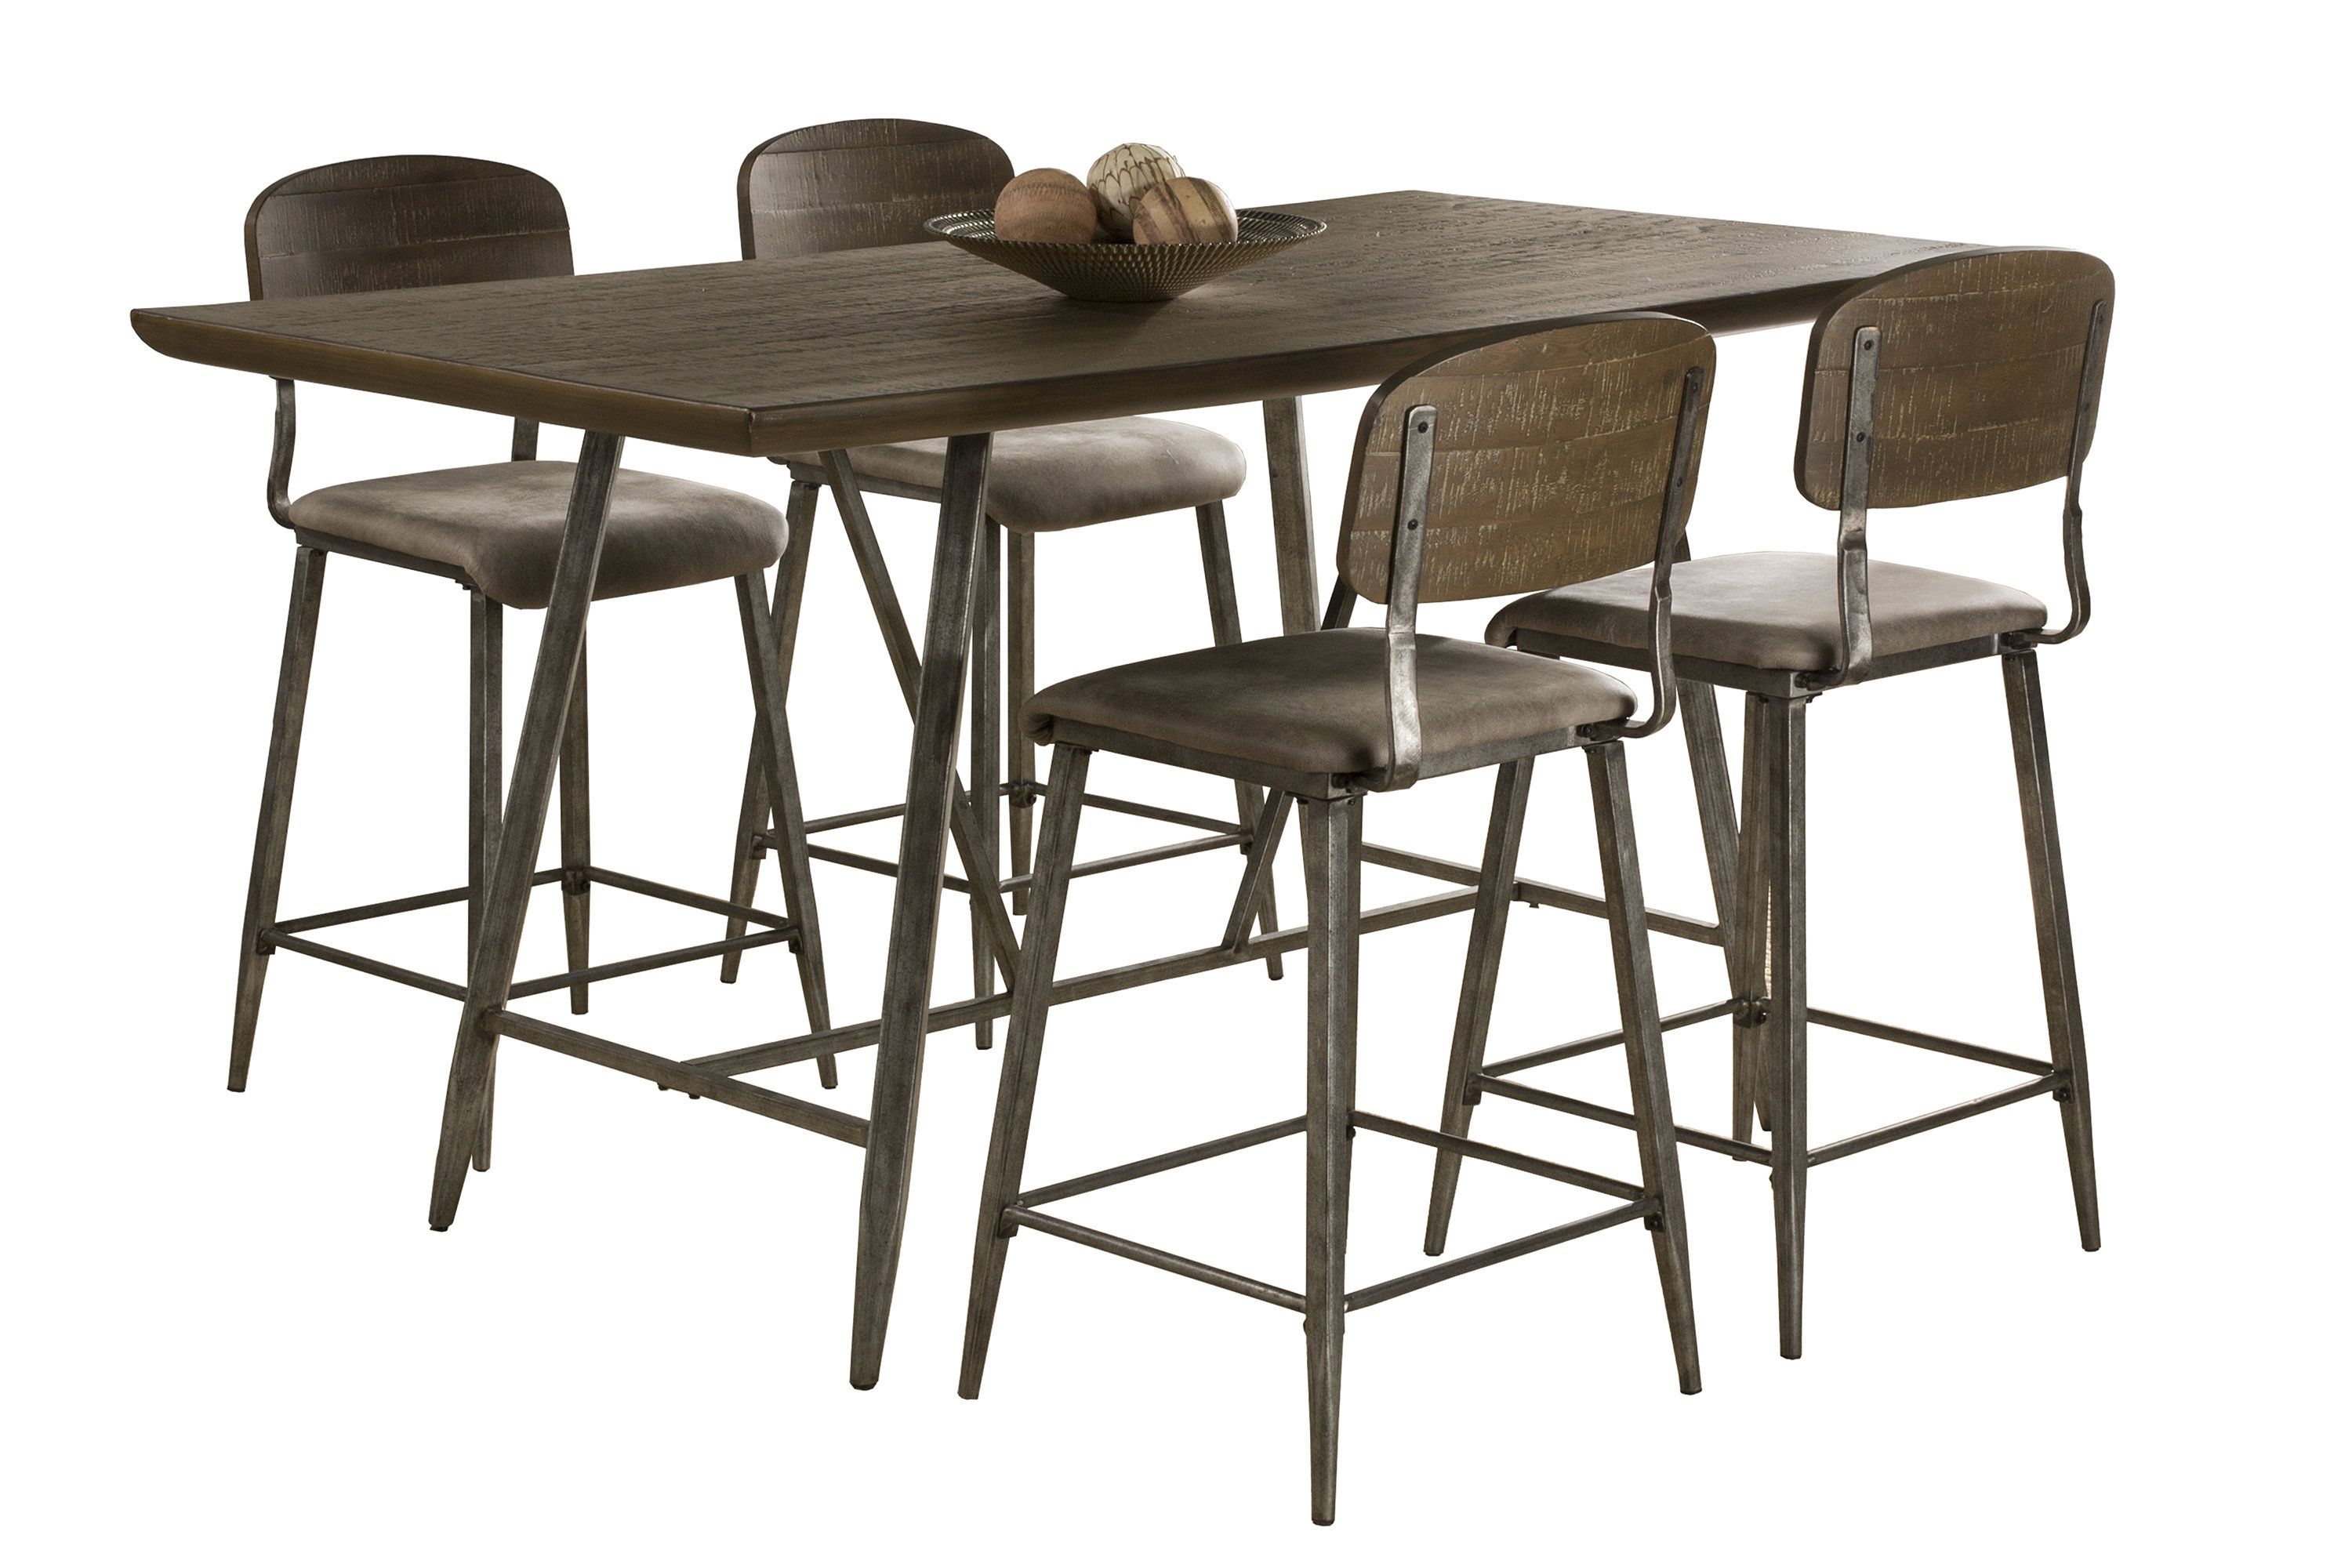 Joss & Main Throughout Telauges 5 Piece Dining Sets (View 20 of 20)